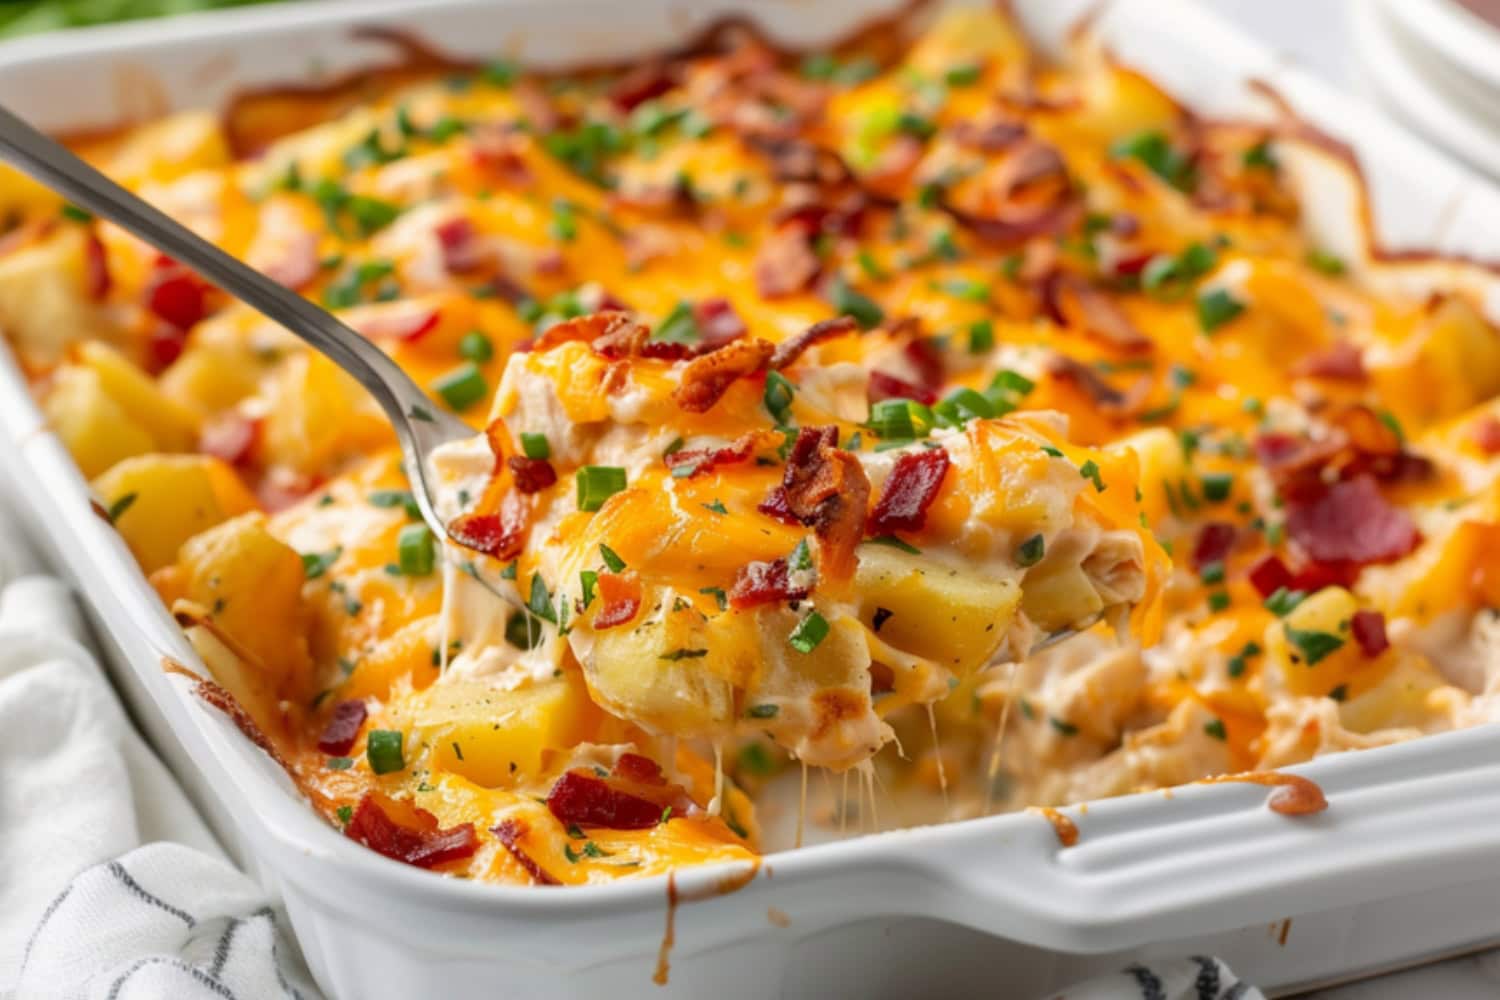 Spoon lifting a serving of cheesy chicken and potato casserole from baking dish.